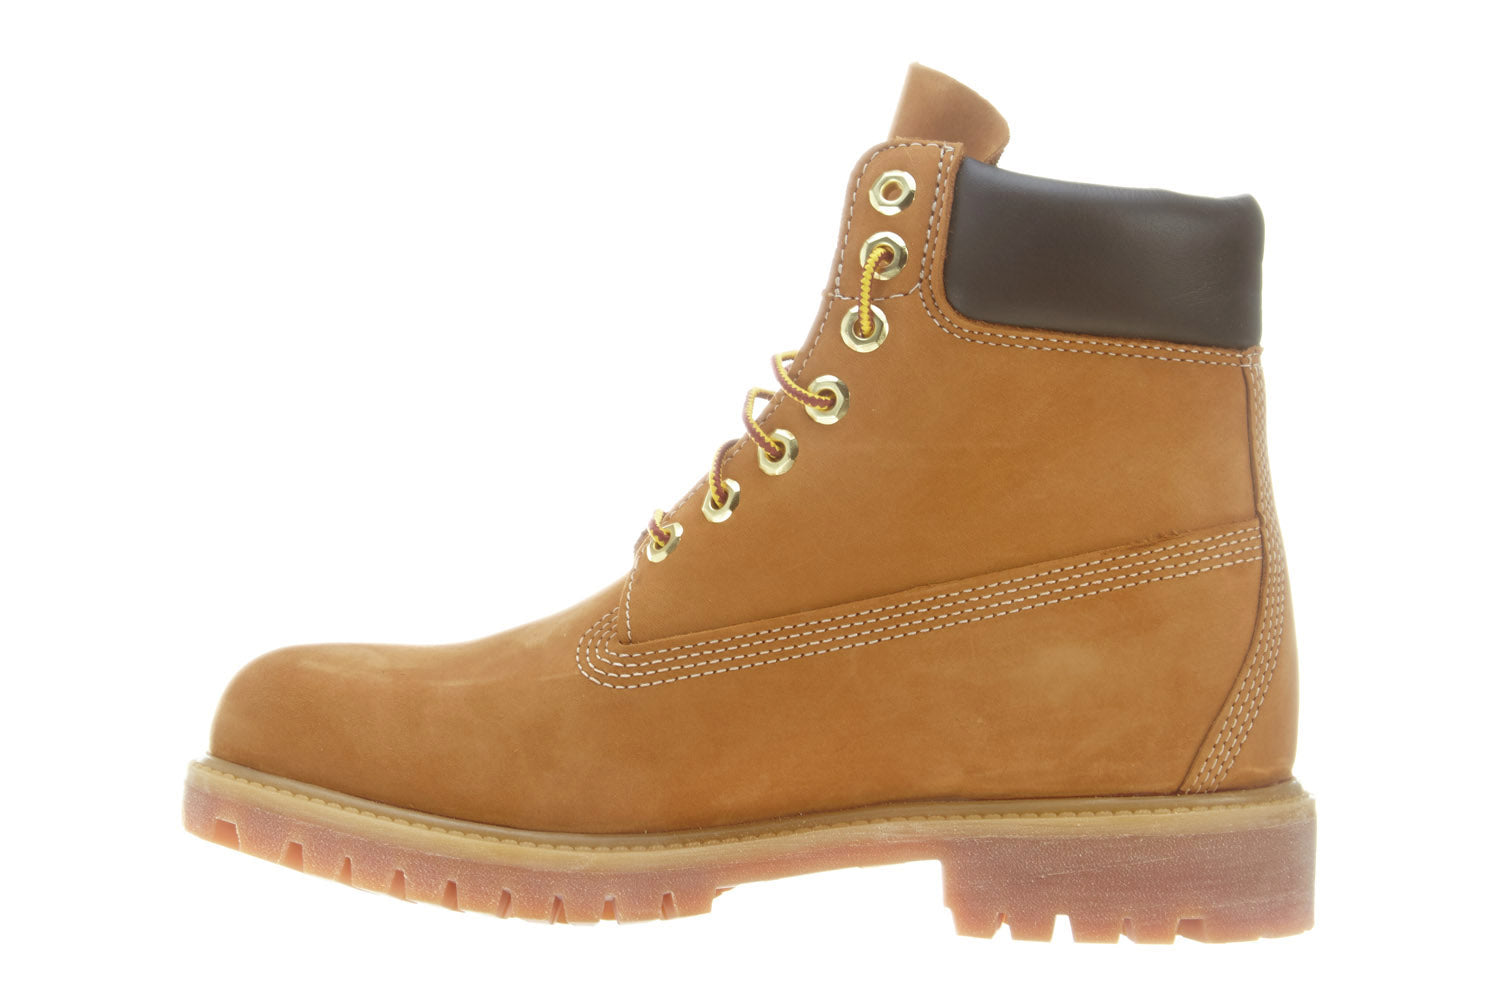 Timberland Classic 6 Inch Premium Mens Basic Waterproof Boots (Wide Width)